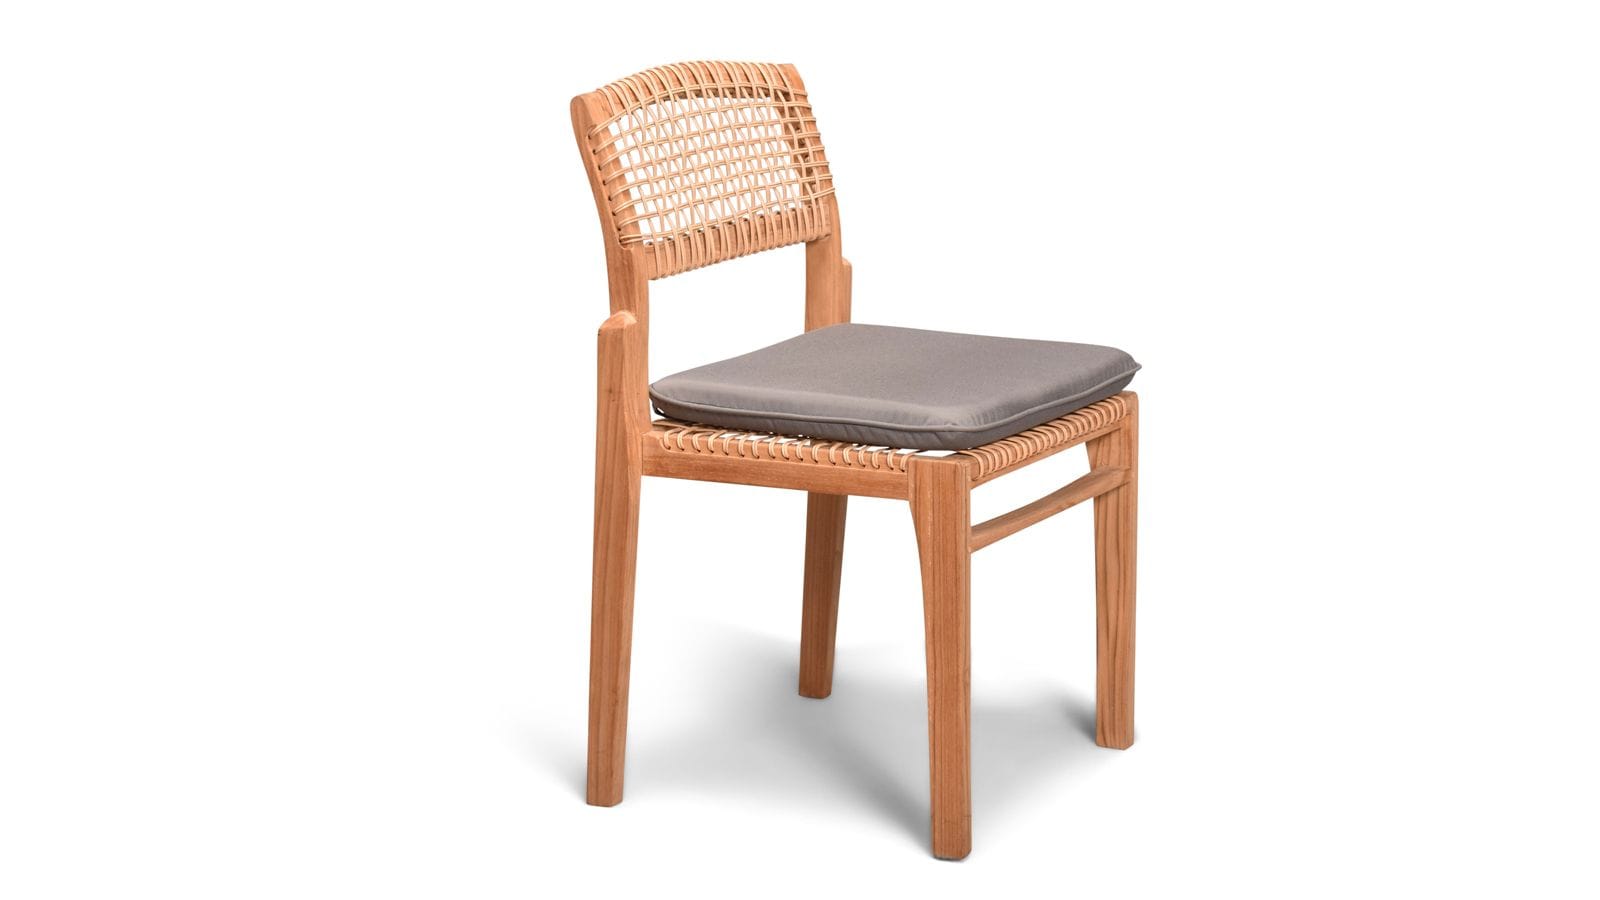 Harmonia Living Outdoor Furniture Canvas Charcoal Harmonia Living - Sands Dining Side Chair | HL-SNDS-SD-DSC